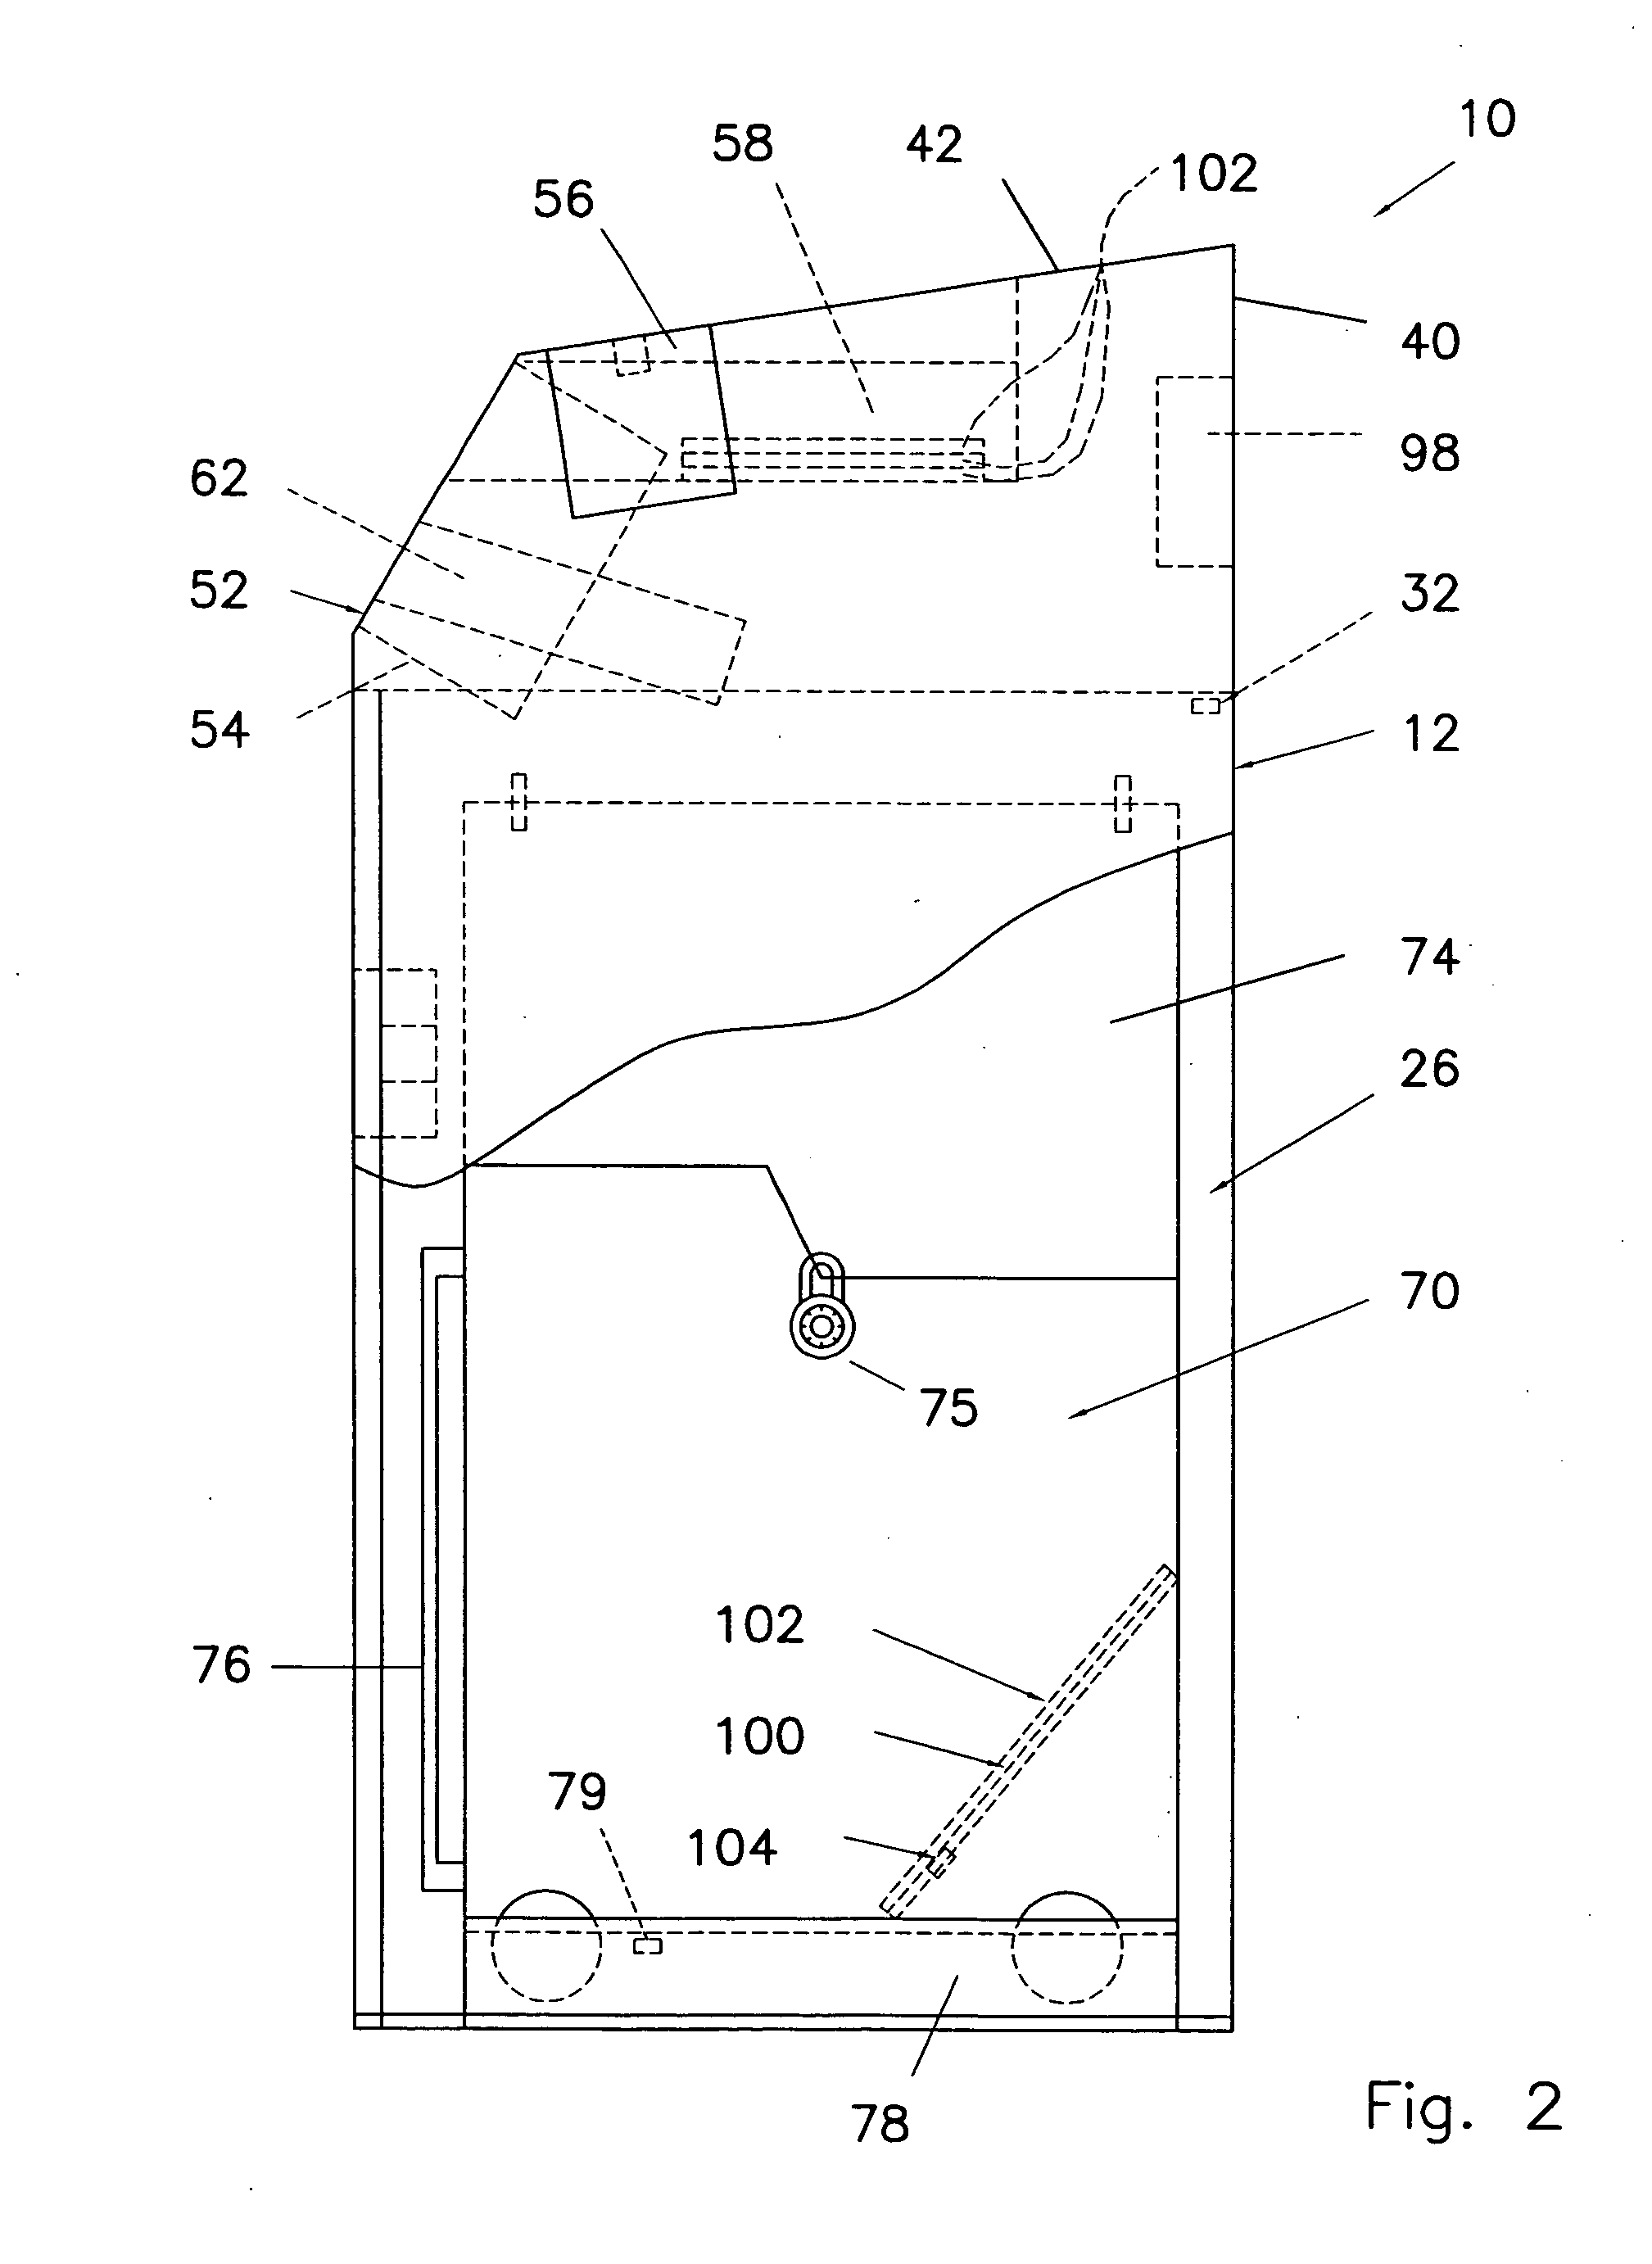 Sensitive commodity depository and method of use